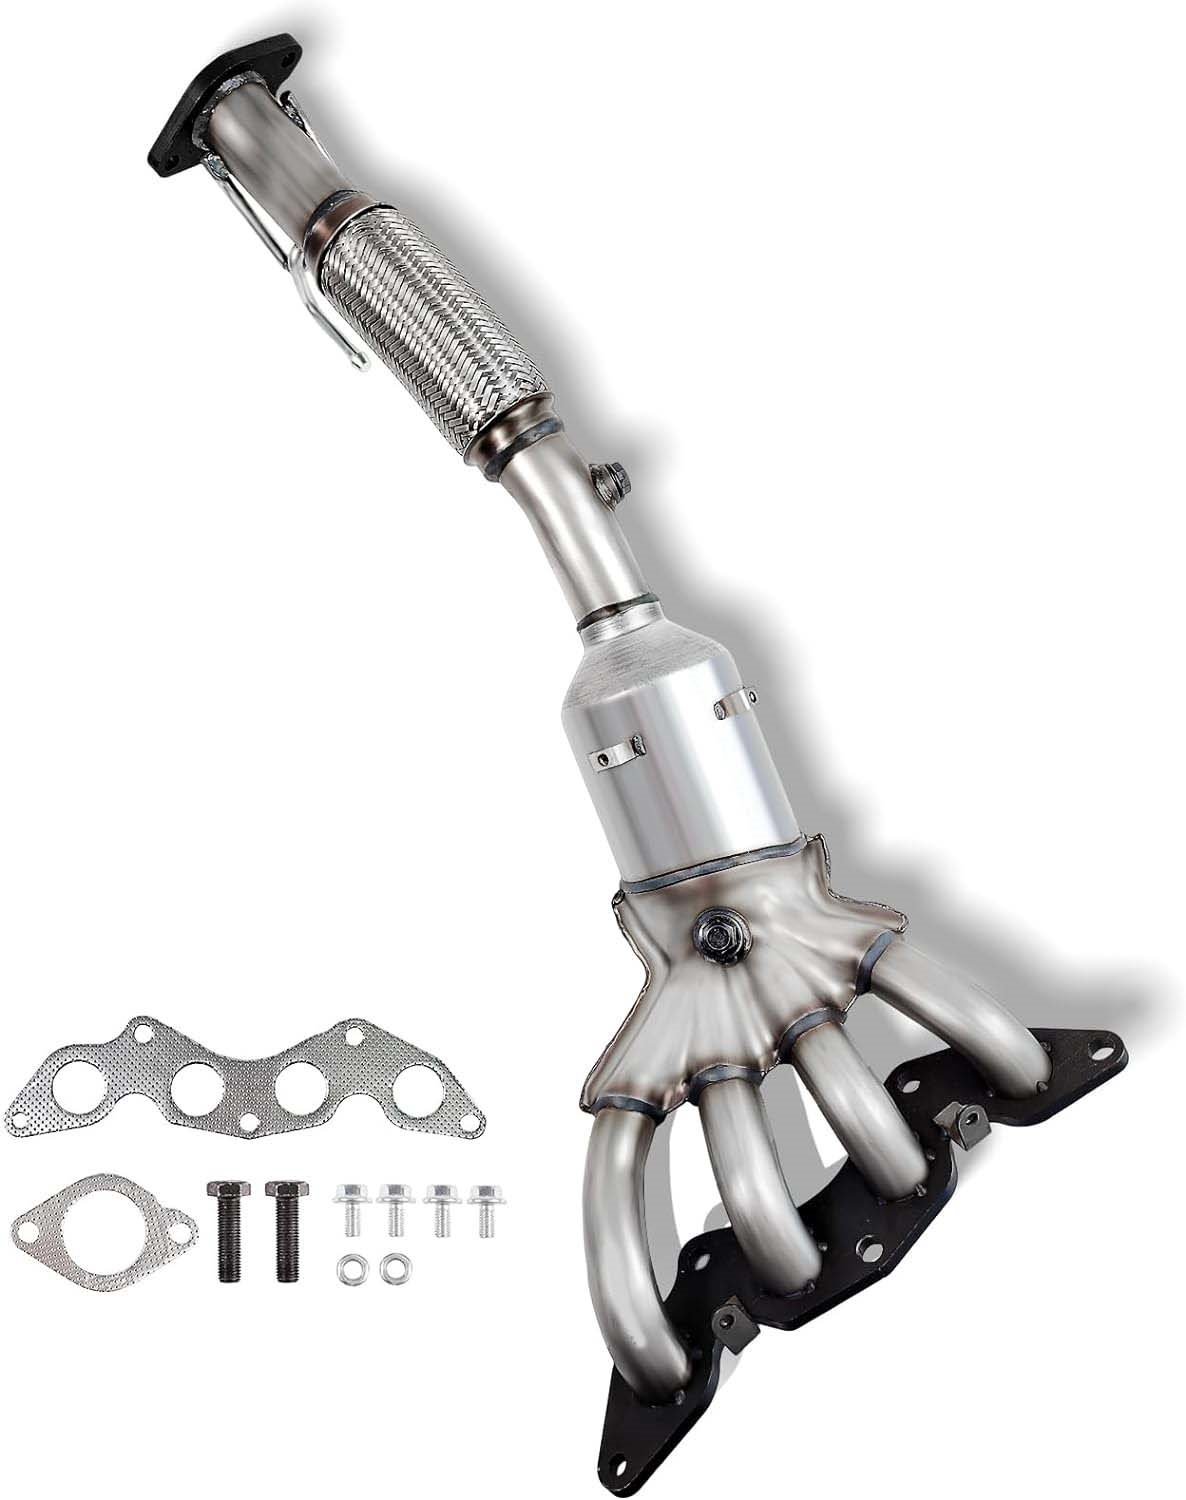 Catalytic Converter Fits 2012-2018 Ford Focus w/2.0L 4 cyl, 1.0L & 2.0L Turbocharged 4 cyl. [Front]